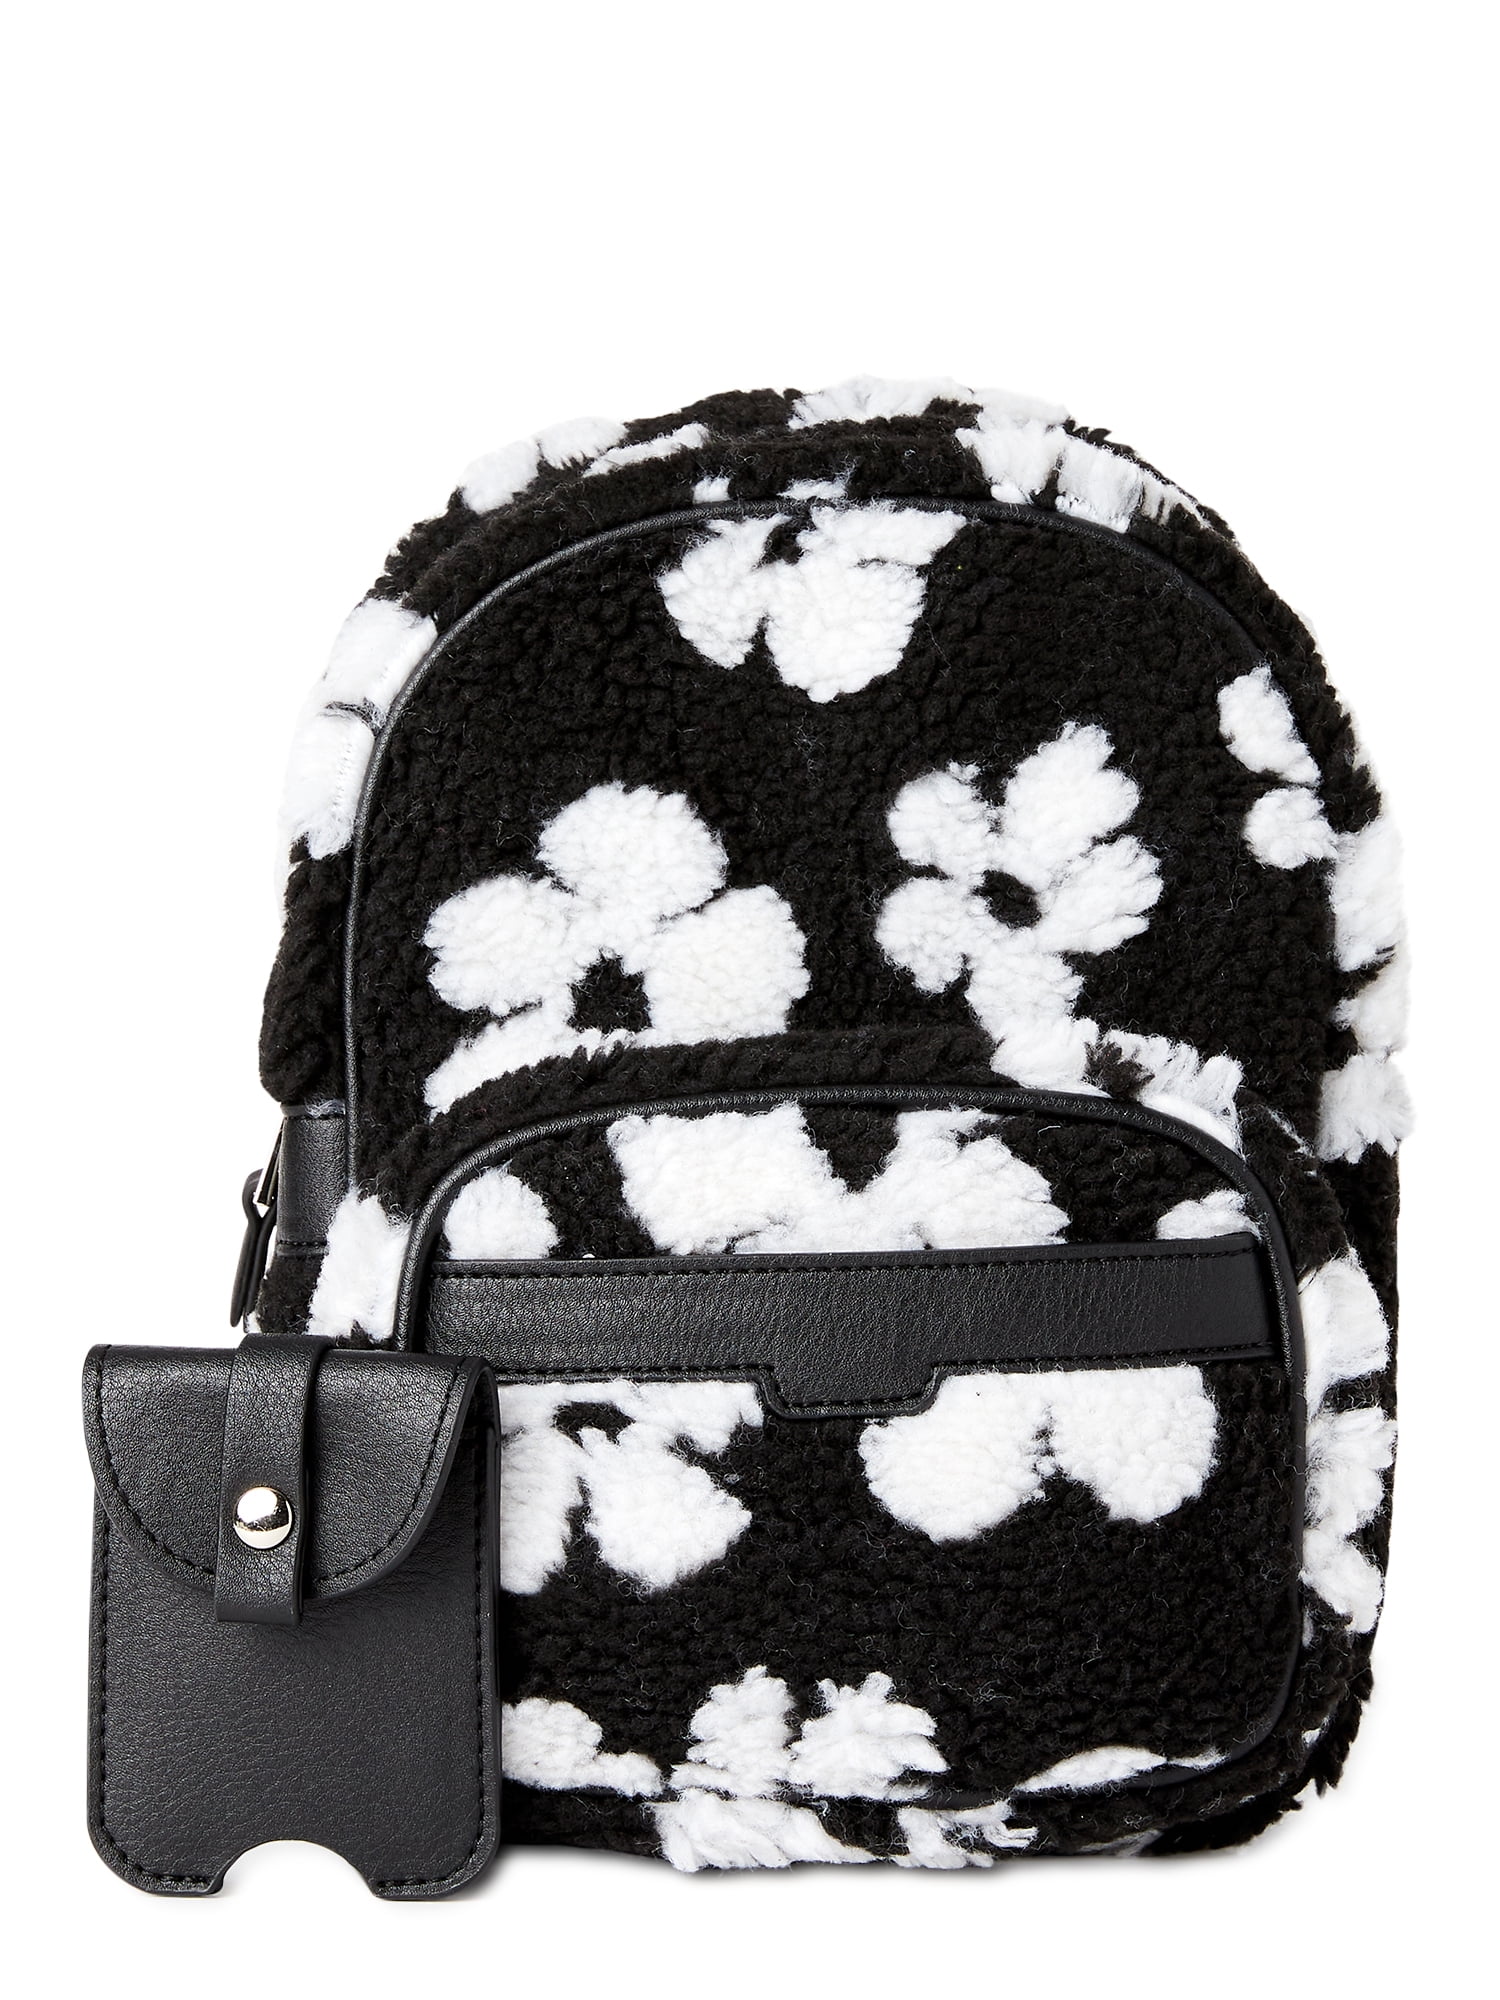 No Boundaries Women's Hands-Free Convertible Backpack Black and White Floral